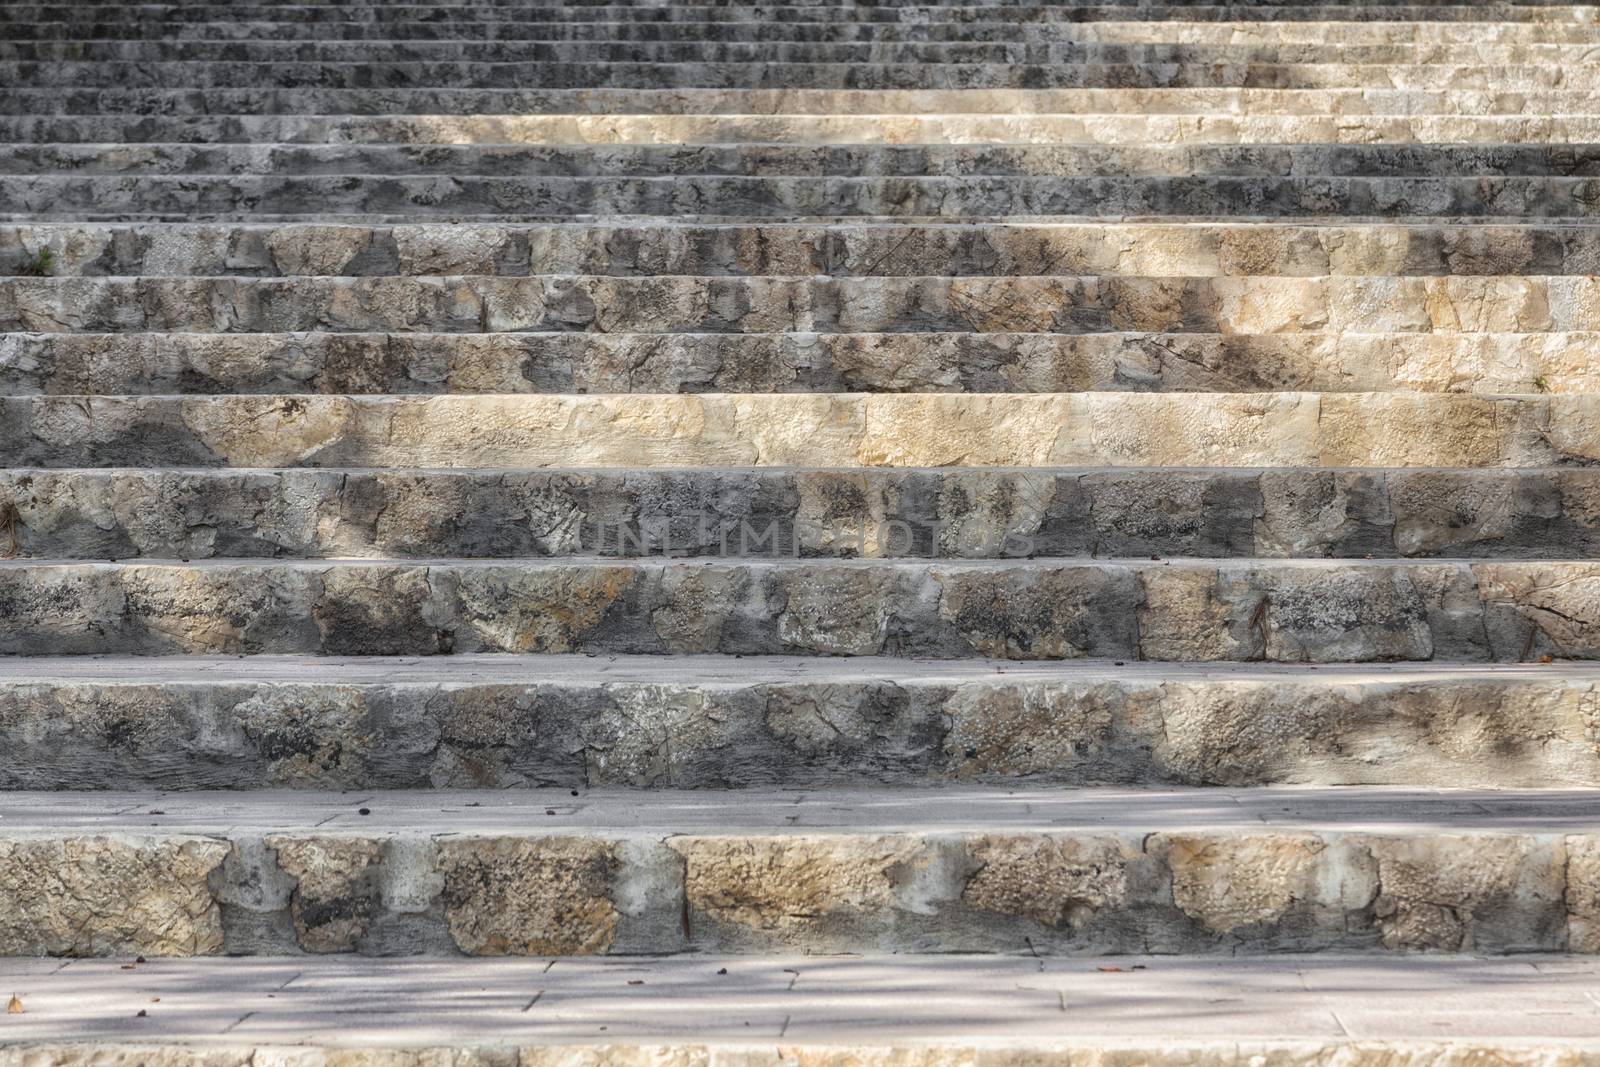 Stair steps of stone which lead upwards by sandra_fotodesign